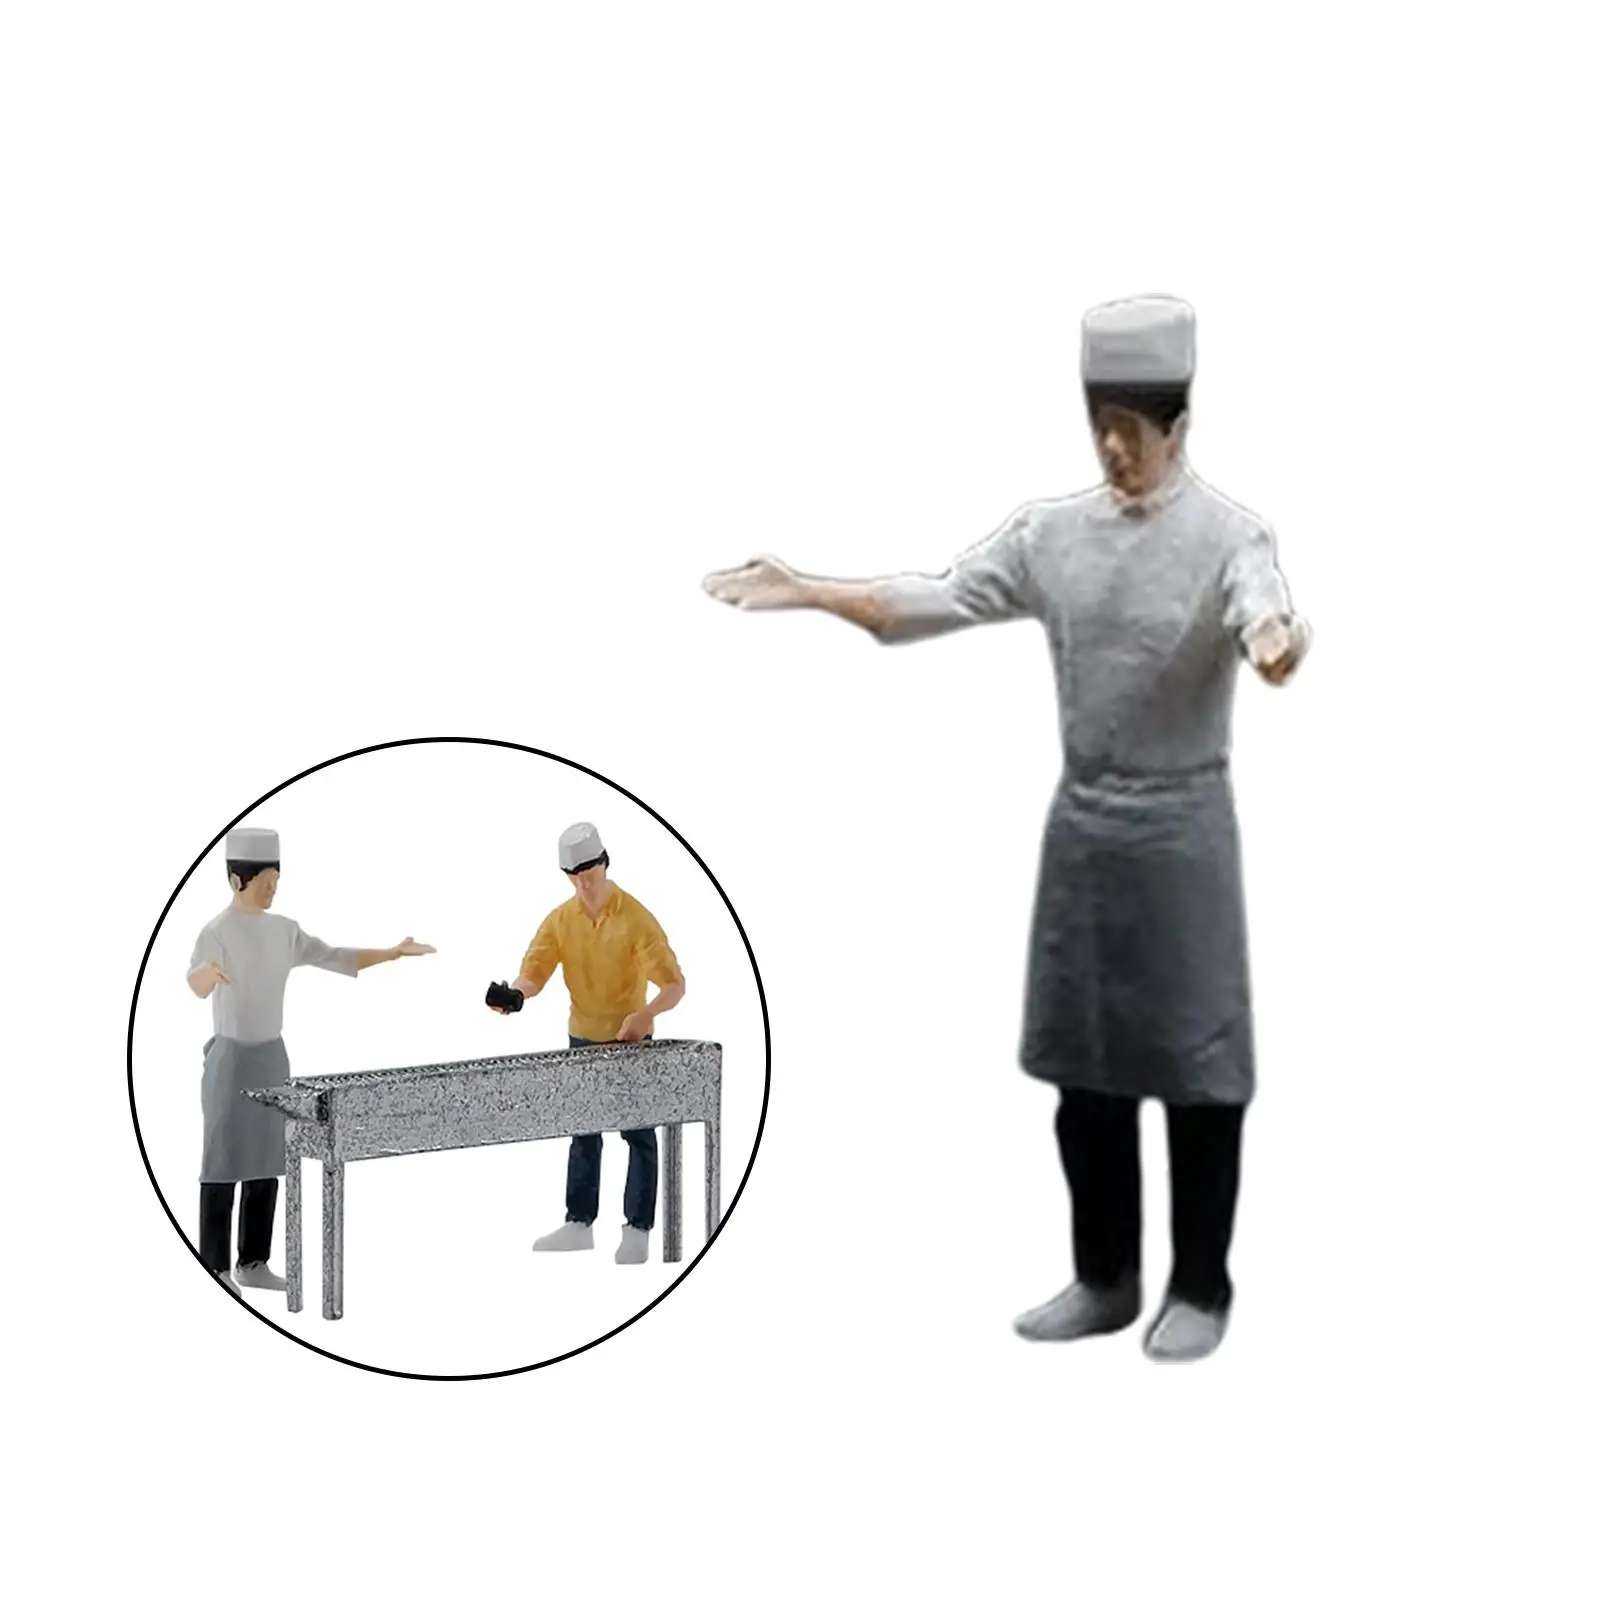 Resin 1/64 BBQ Chef Figures Diorama Scenery People Model Fairy Garden Ornaments